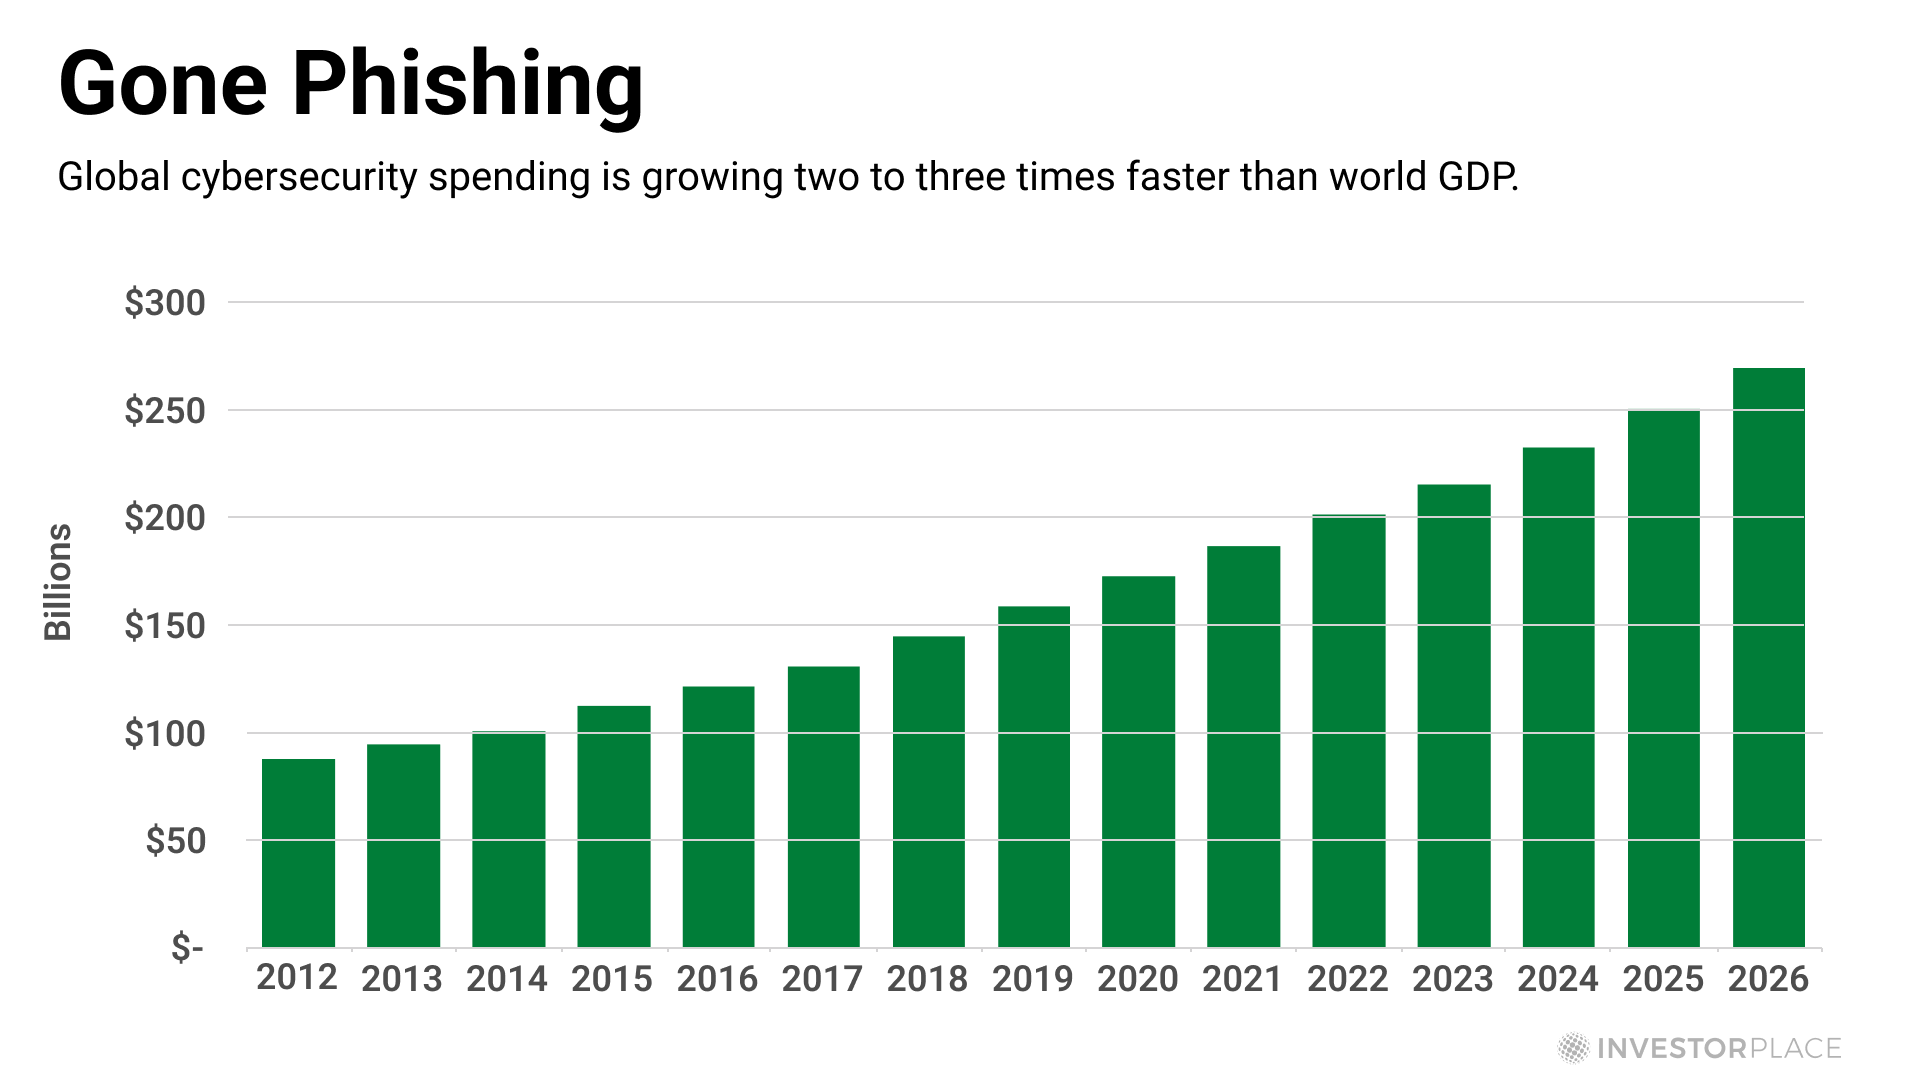 A chart showing how global cybersecurity spending is growing 2-3X faster than world GDP; the dates range from 2012 (less than $100 billion) to projections in 2026, which predict spending to be between $250-$300 billion